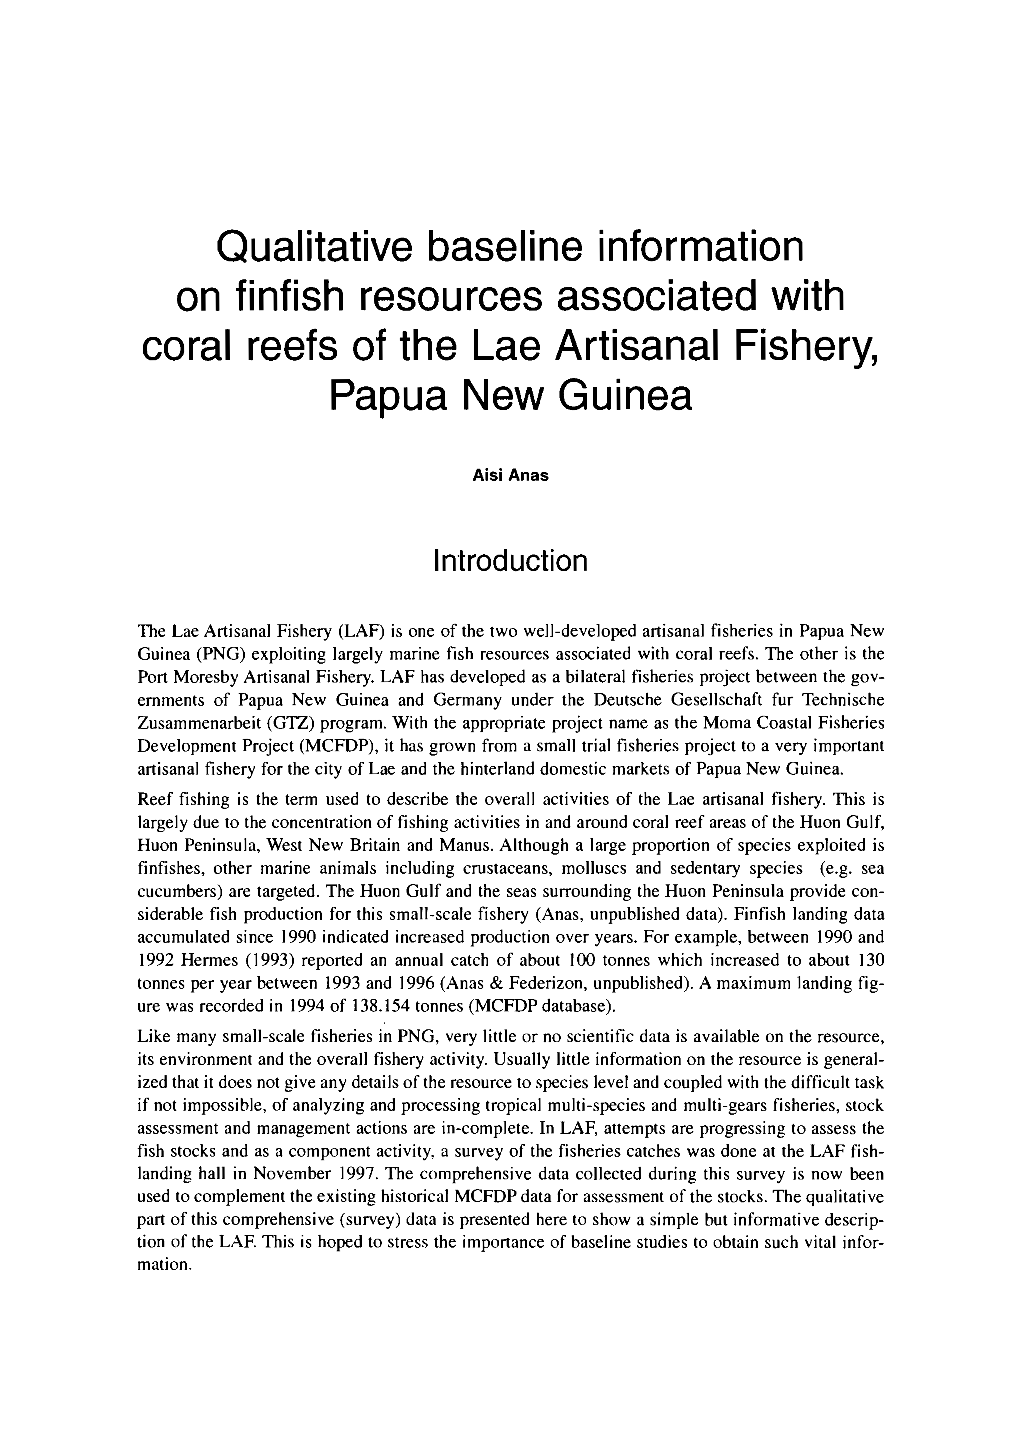 Qualitative Baseline Information on Finfish Resources Associated with Coral Reefs of the Lae Artisanal Fishery, Papua New Guinea